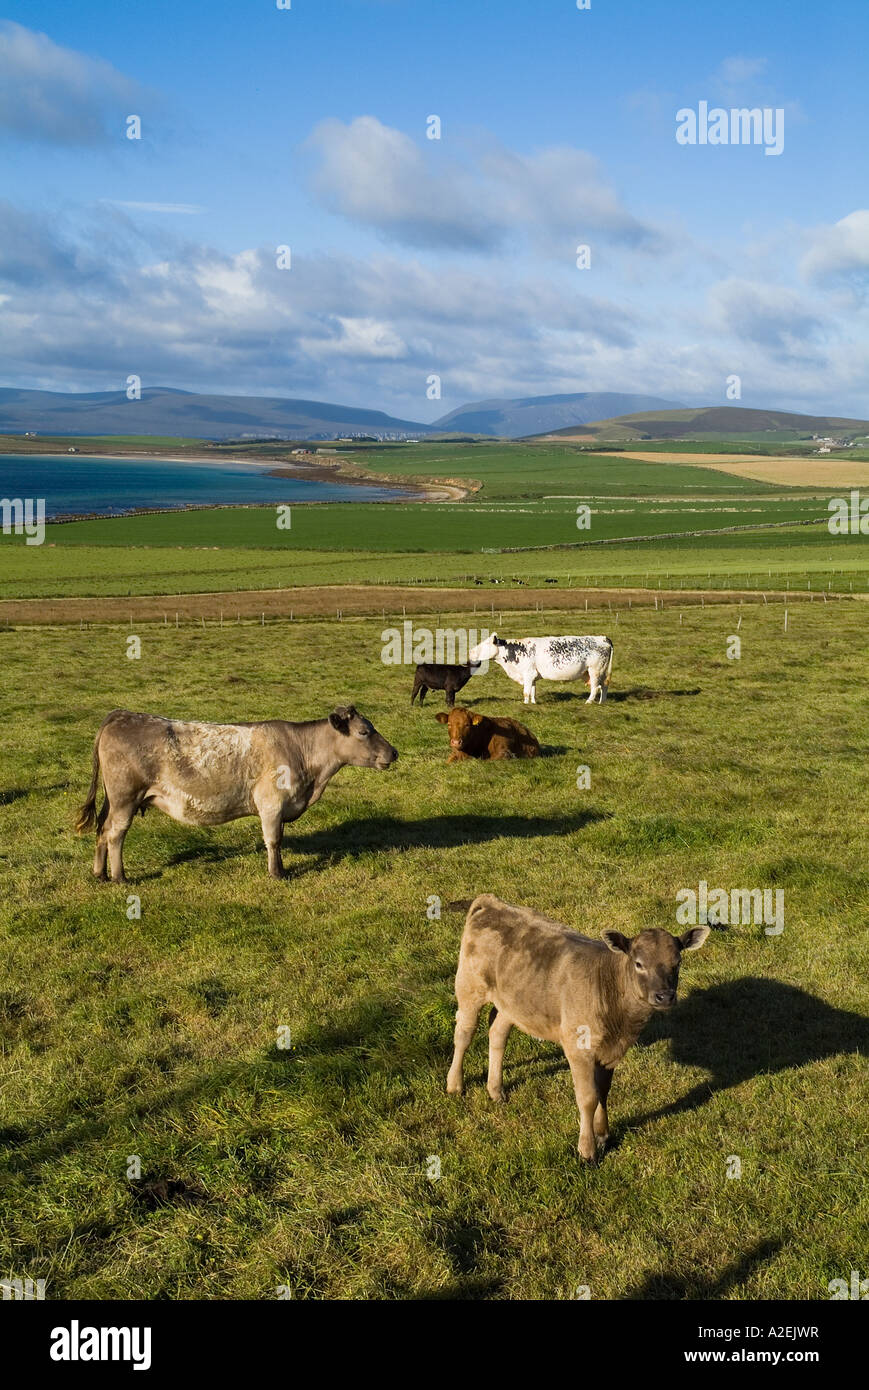 dh Cow ANIMALS UK uk Beef cattle cows and calves grazing in field above Scapa Flow shore Orkney young scottish farming land Stock Photo